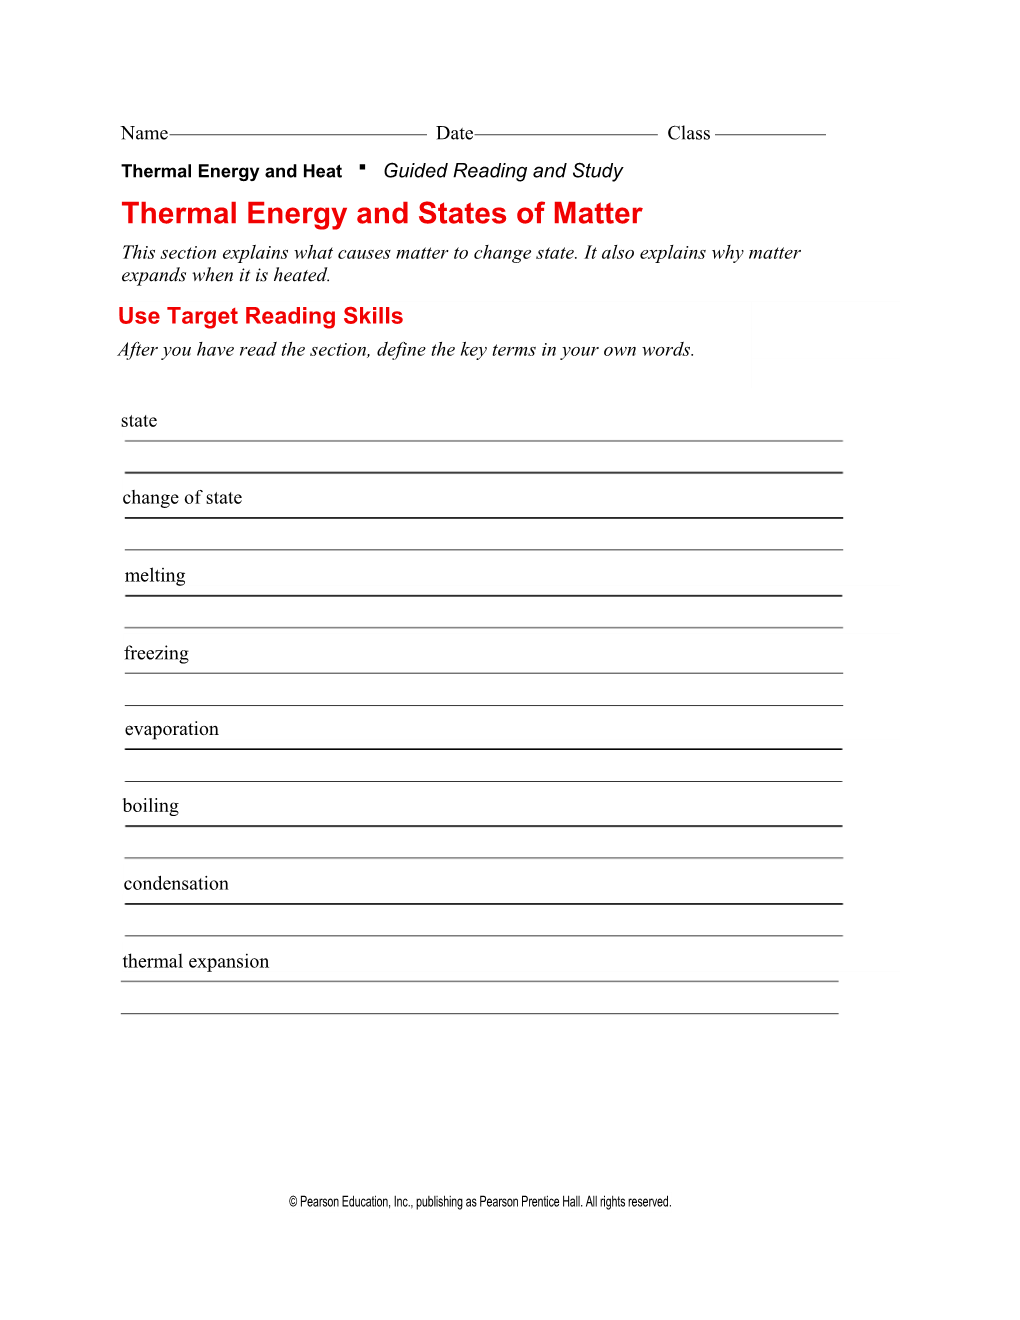 Thermal Energy and Heat Guided Reading and Study